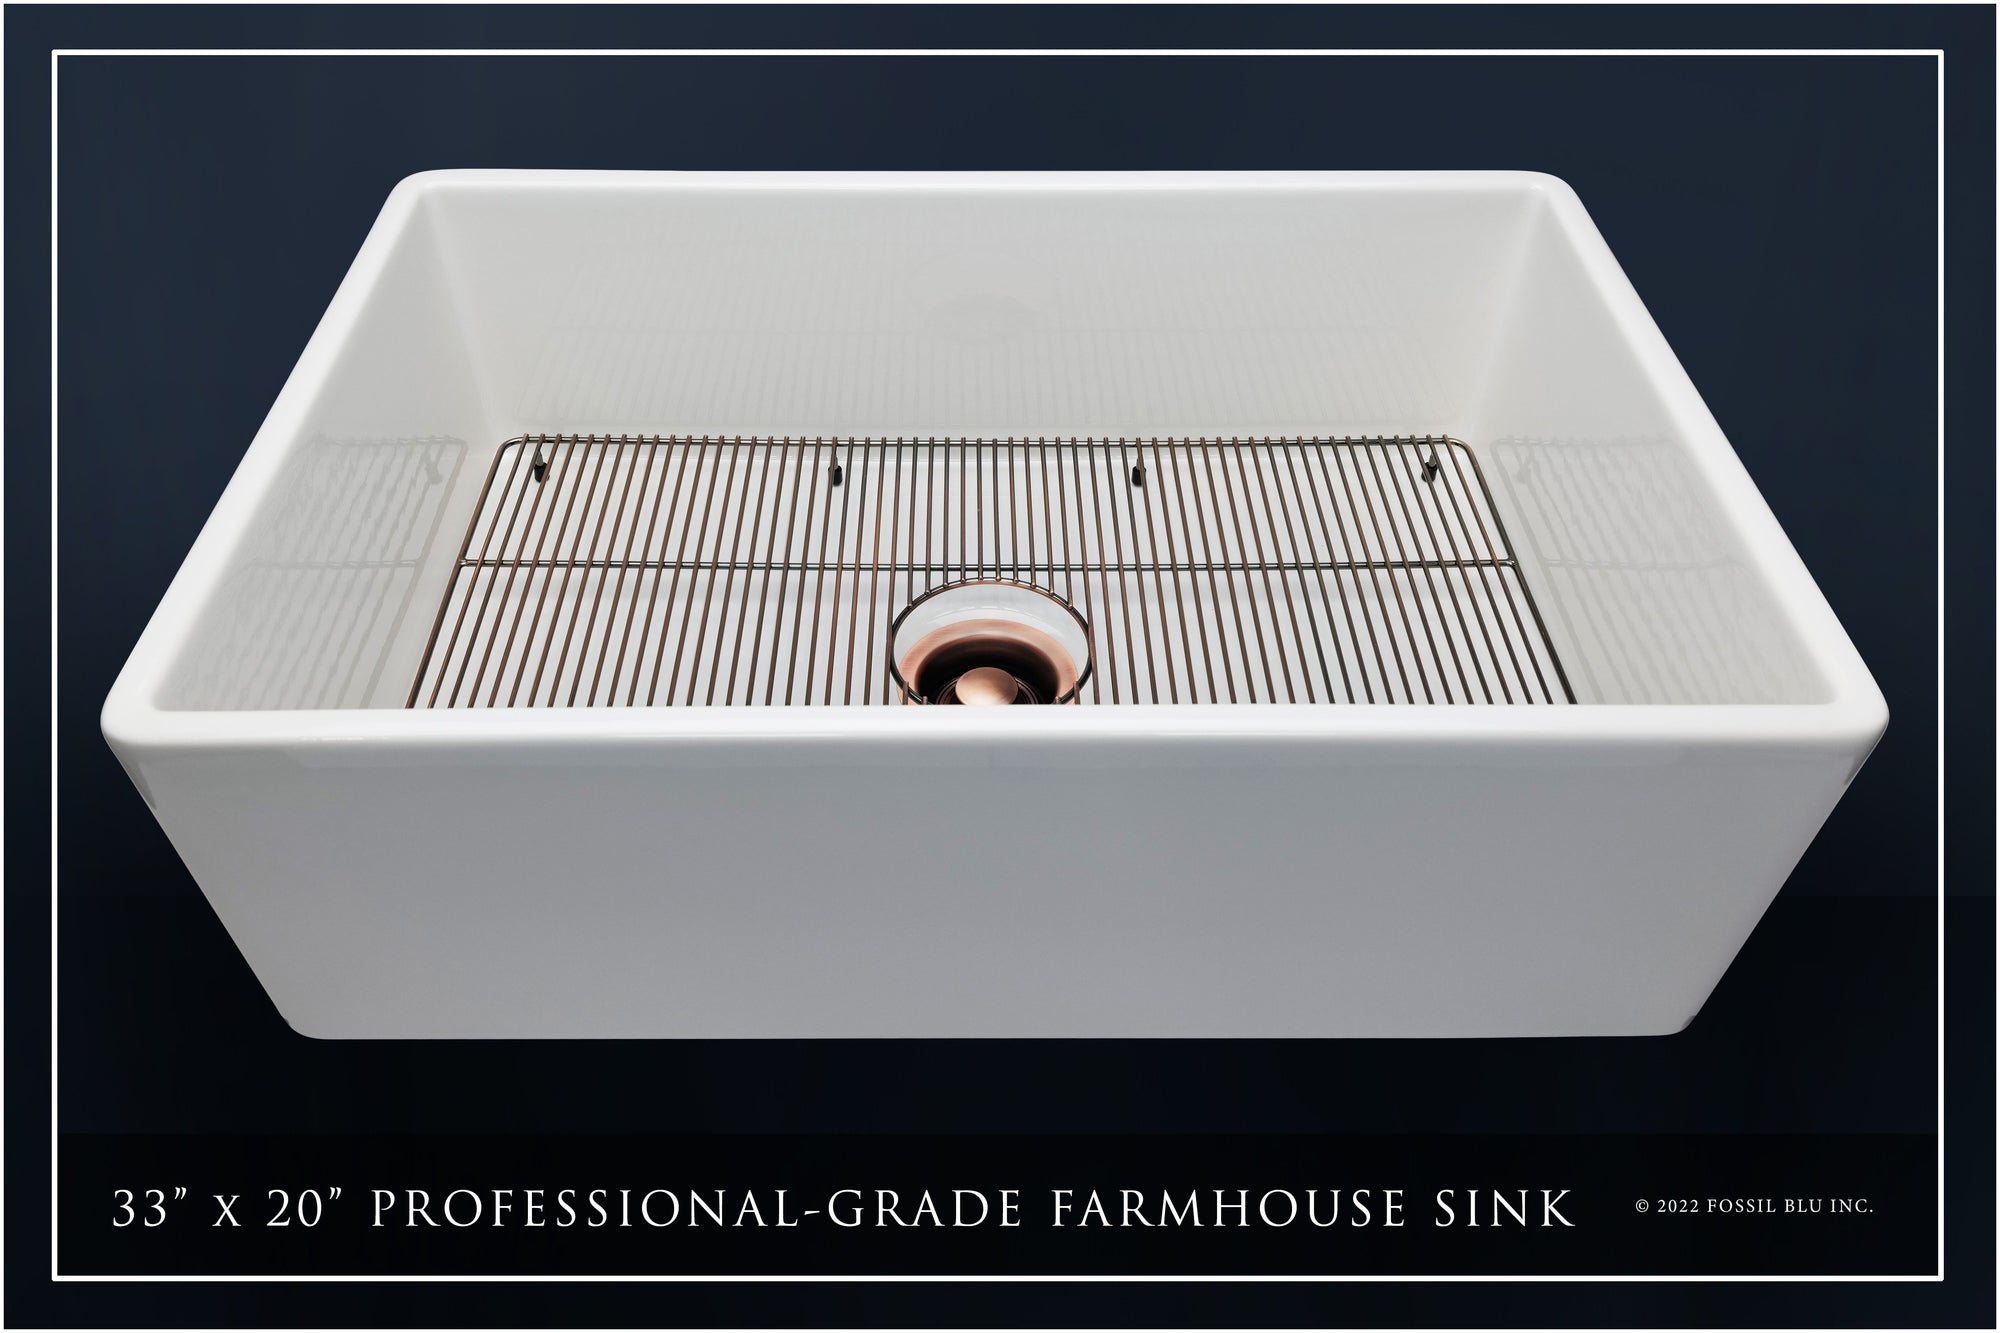 FSW1002AC LUXURY 33-INCH SOLID FIRECLAY FARMHOUSE SINK IN WHITE, ANTIQUE COPPER ACCS, FLAT FRONT